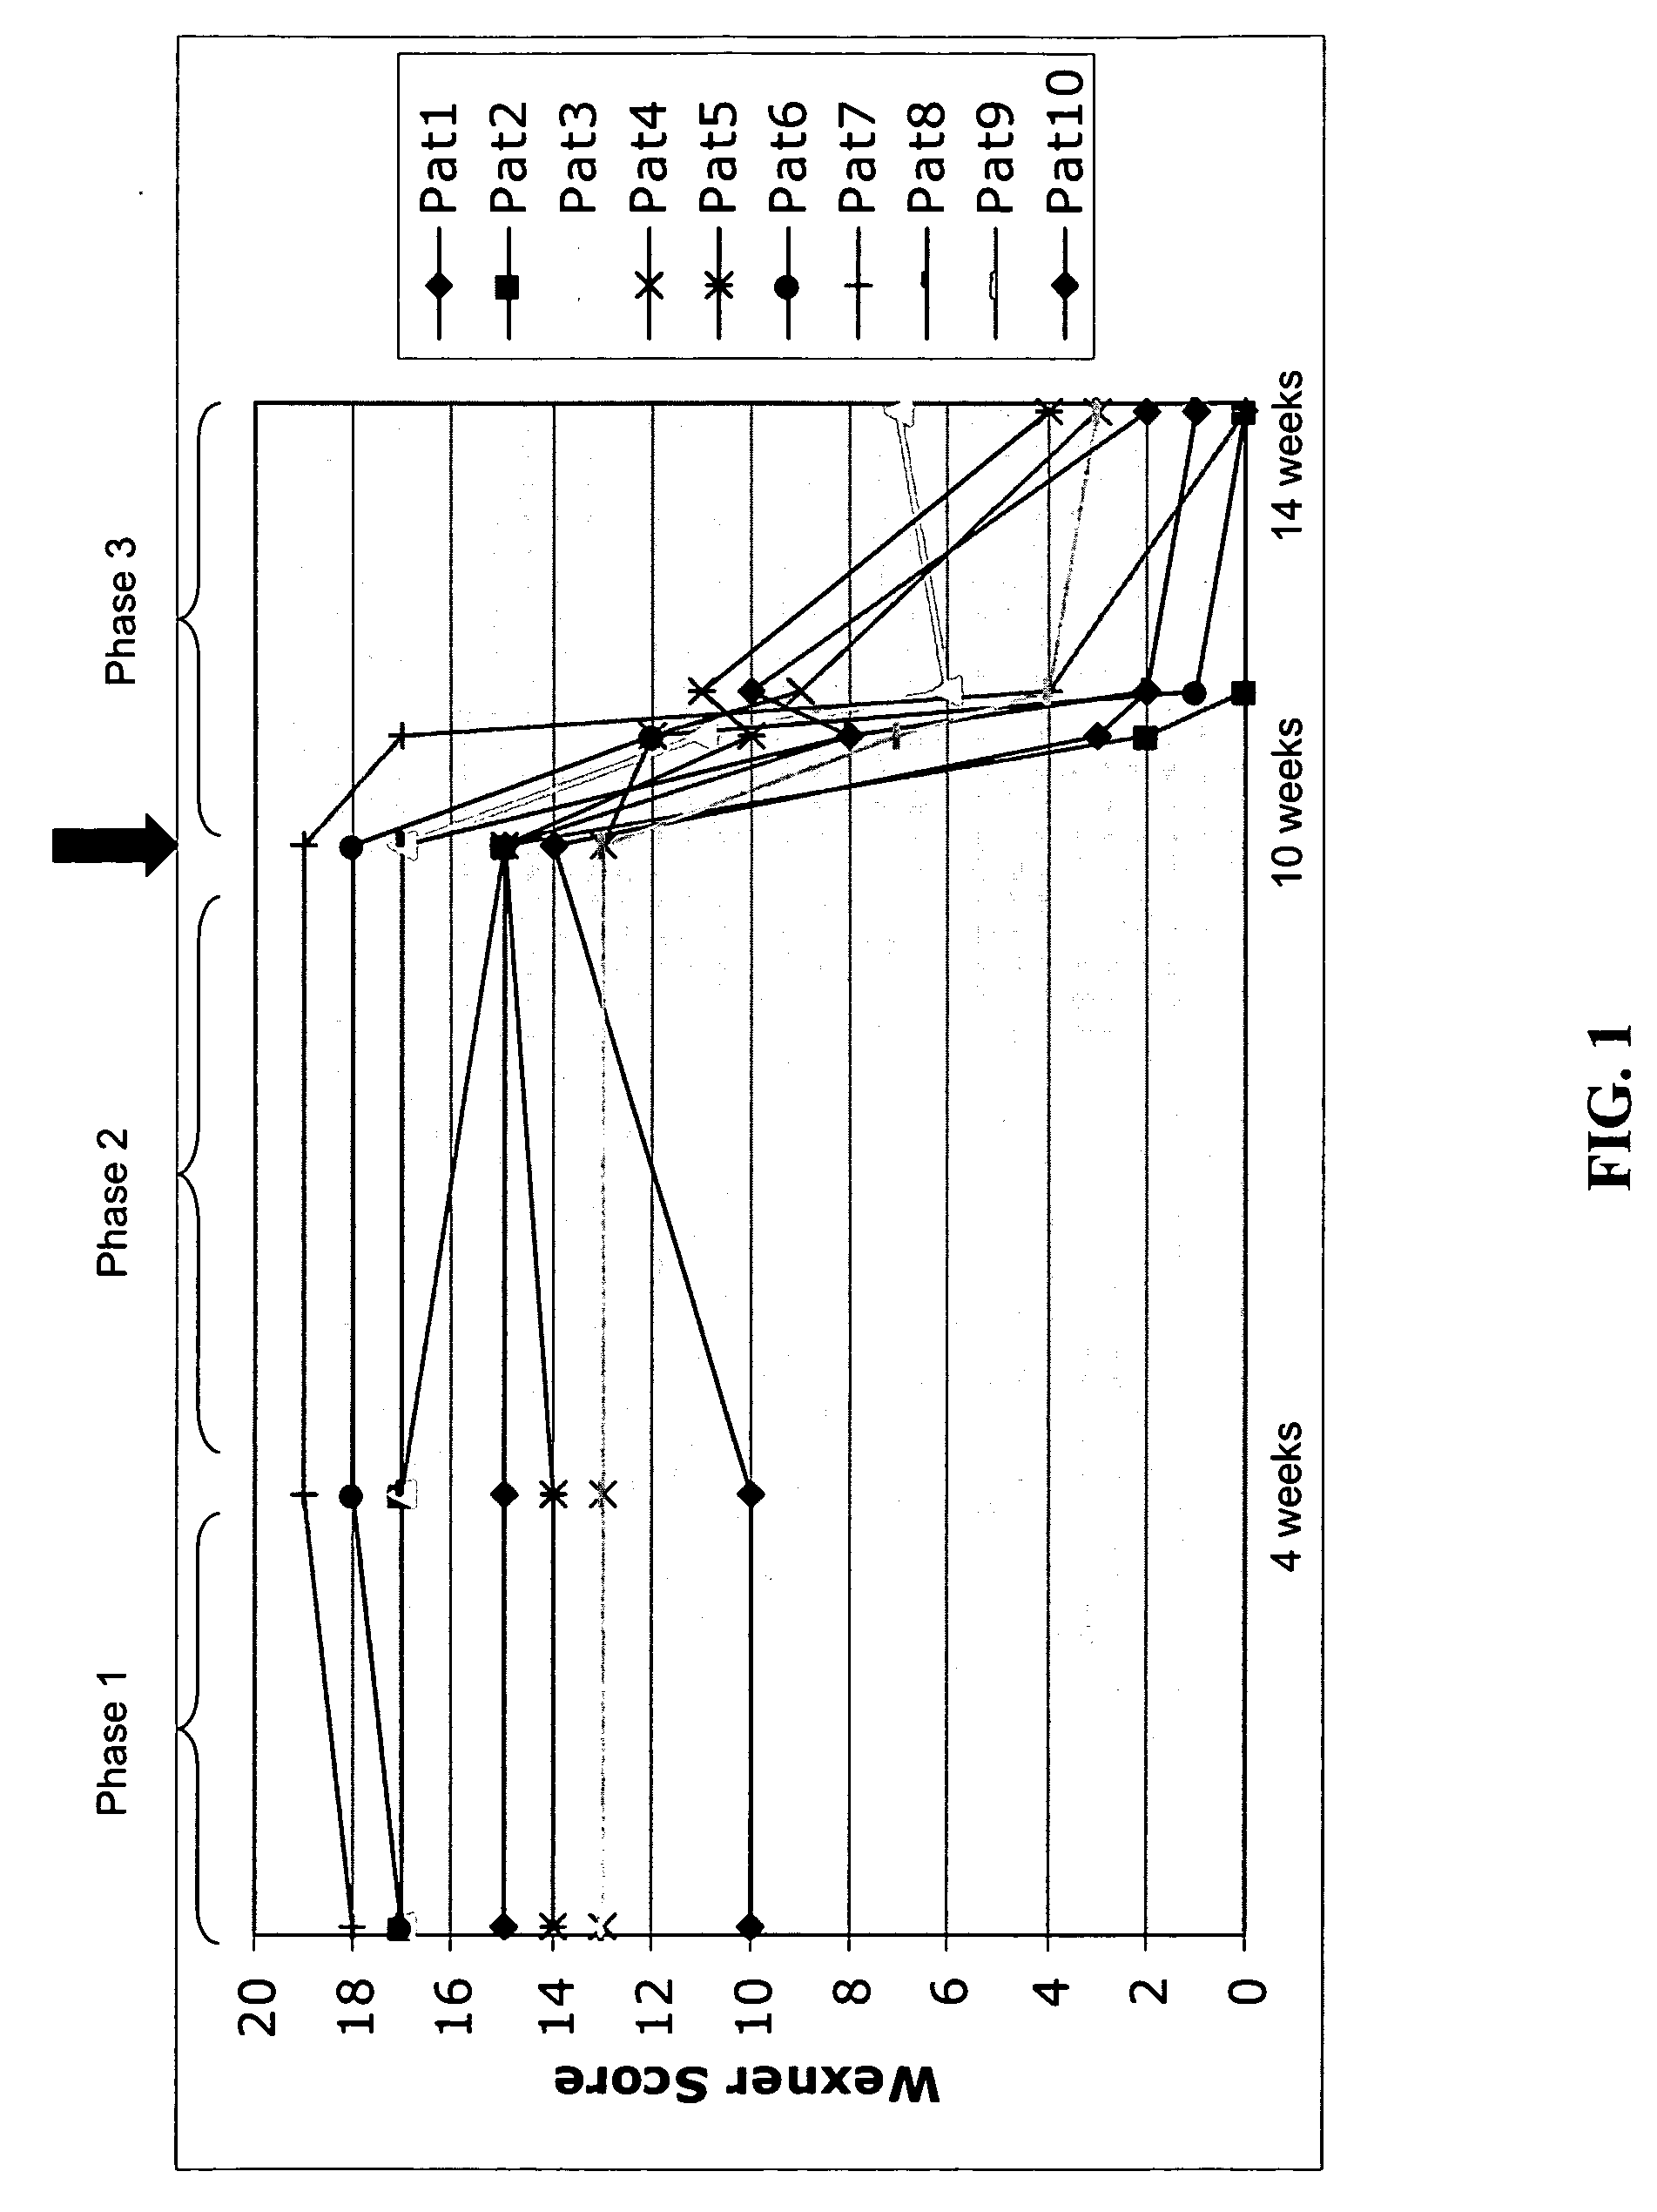 Methods for the treatment of anal incontinence